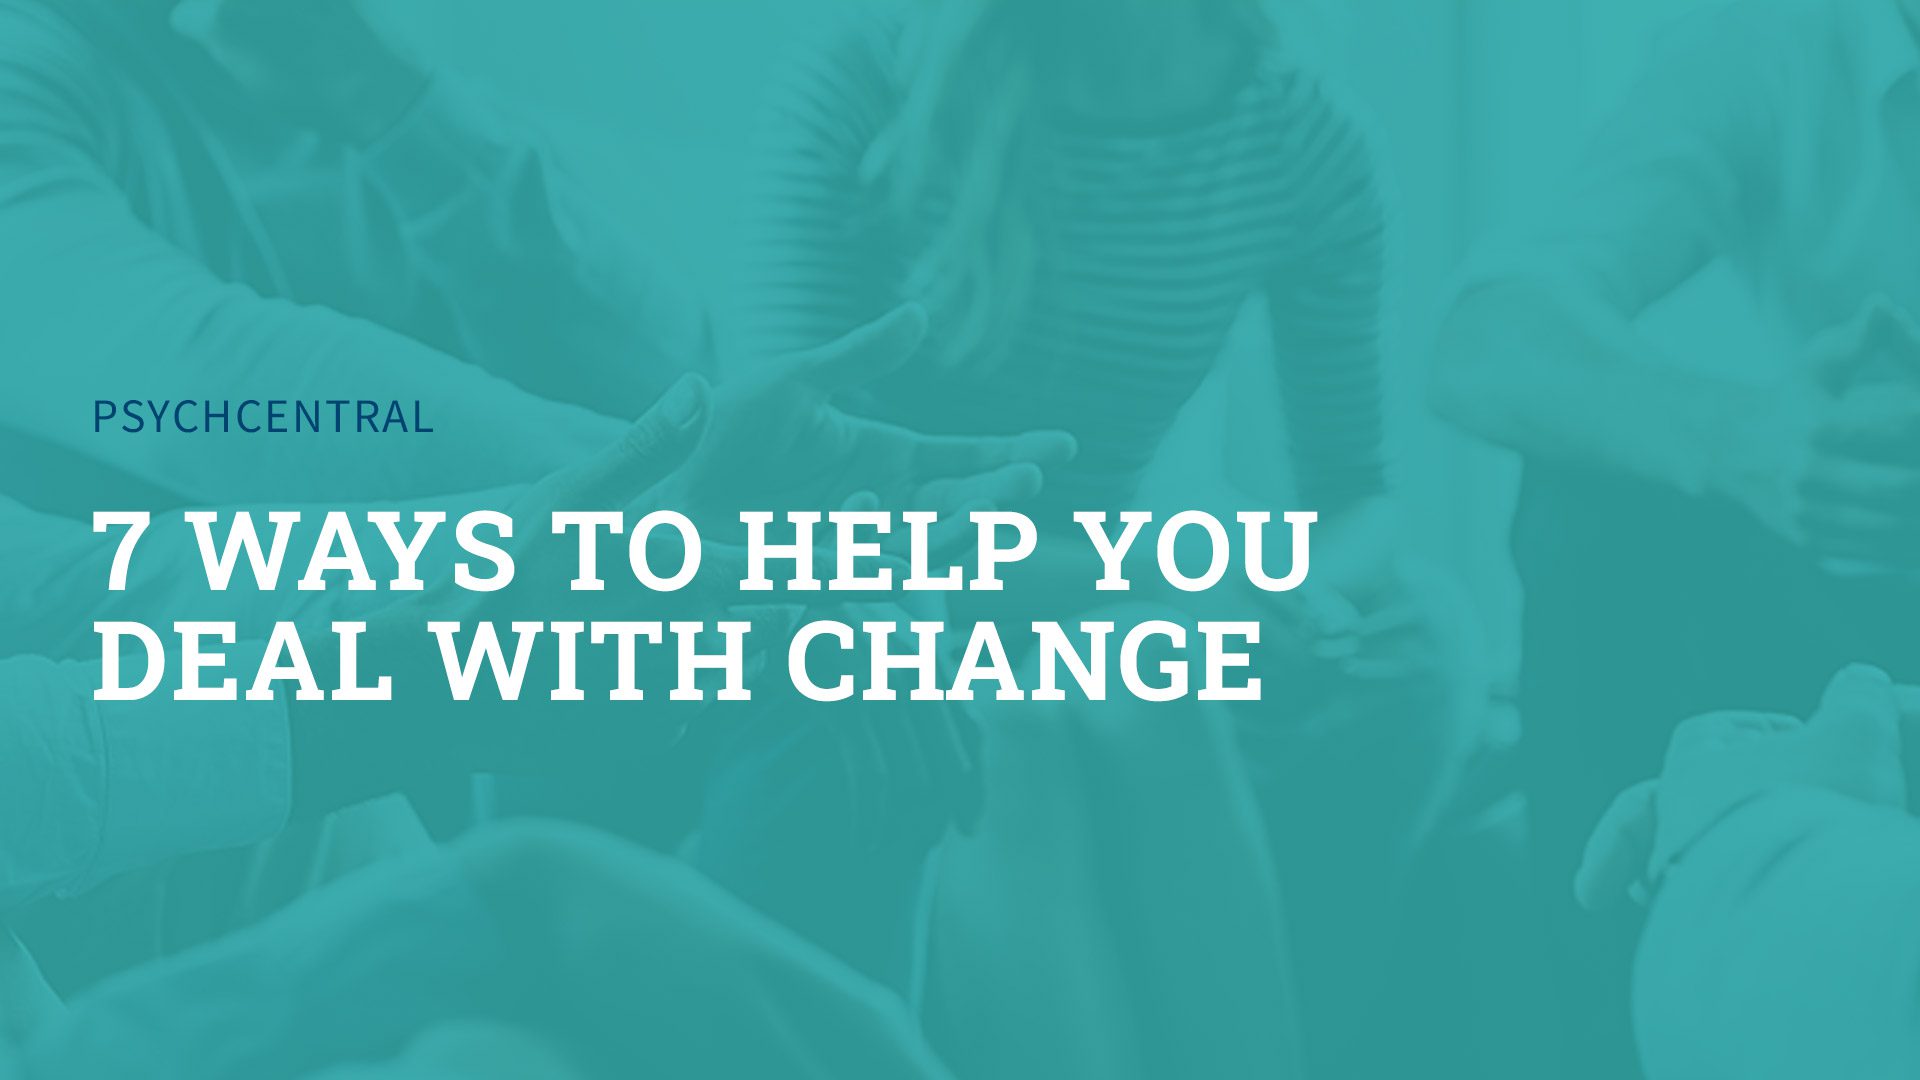 7 Ways to Help You Deal with Change